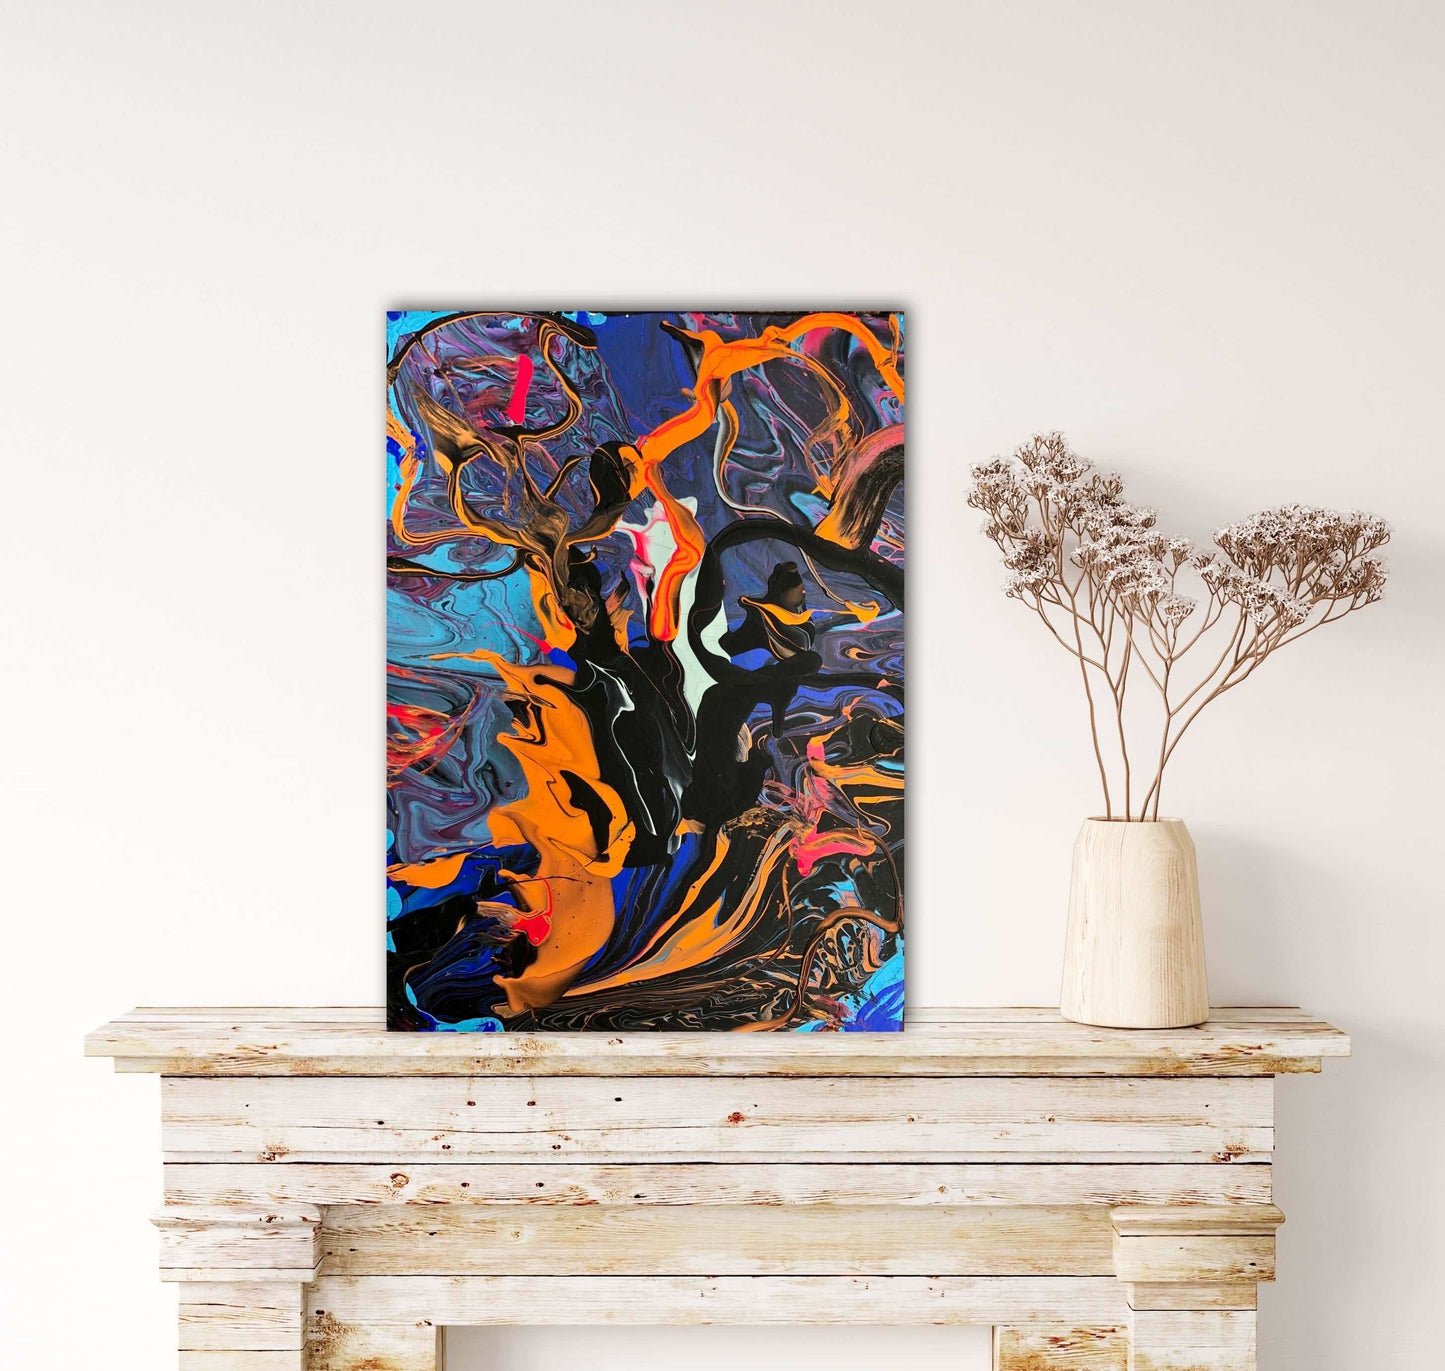 Under The Sea - Bright And Bold, Large Size, Textured Acrylic, Abstract Painting With Orange Accents, by Art with Evie